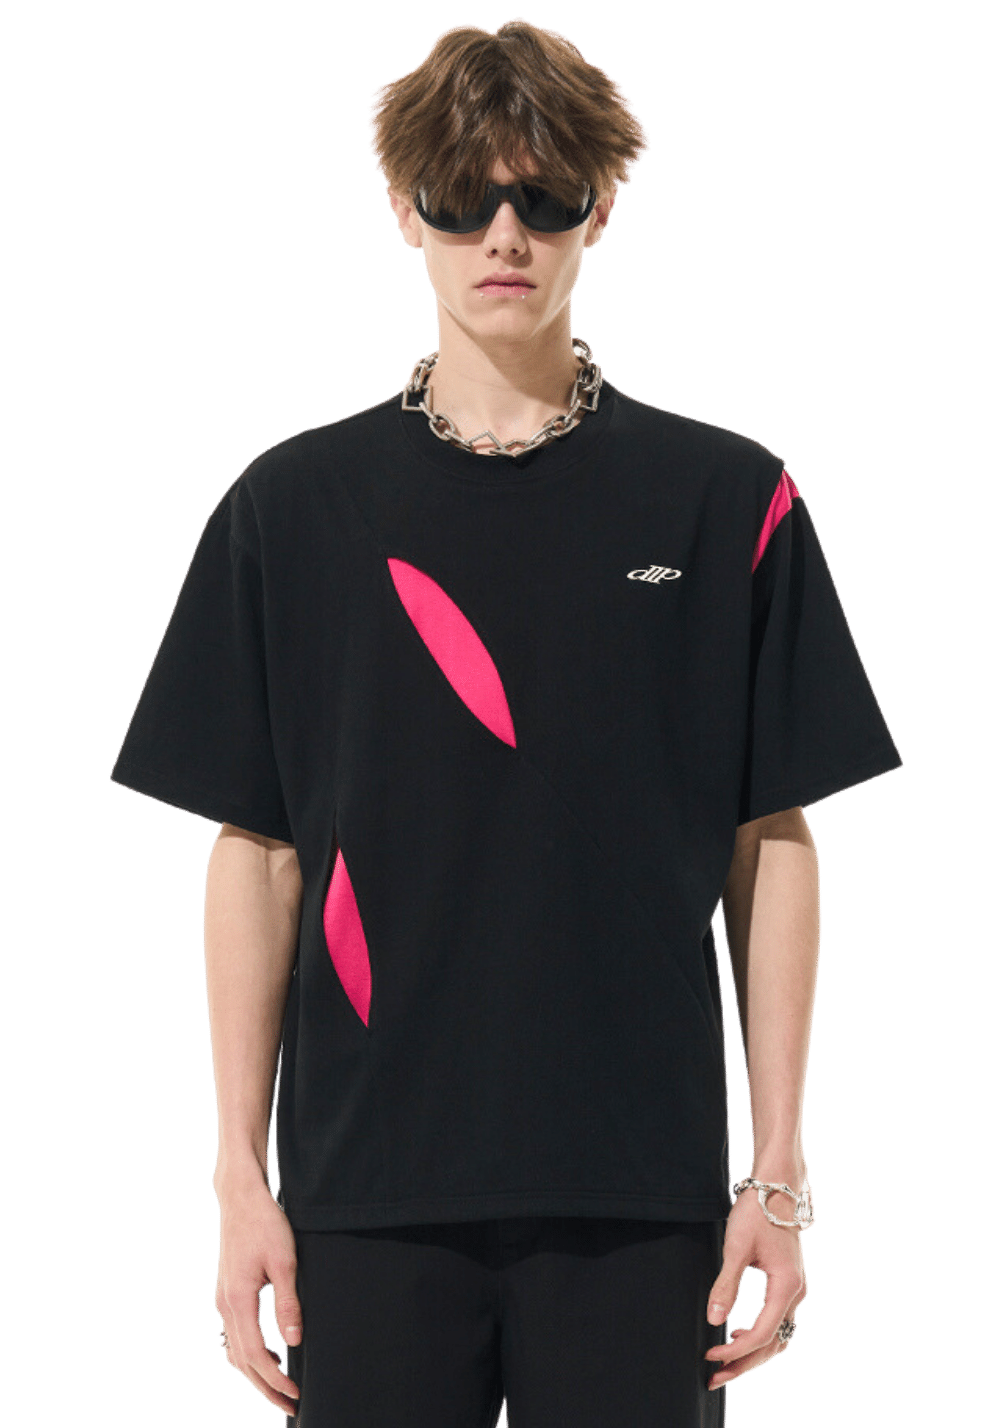 Contrasting Double-Layered T-Shirt - PSYLOS 1, Contrasting Double-Layered T-Shirt, T-Shirt, MODITEC, PSYLOS 1